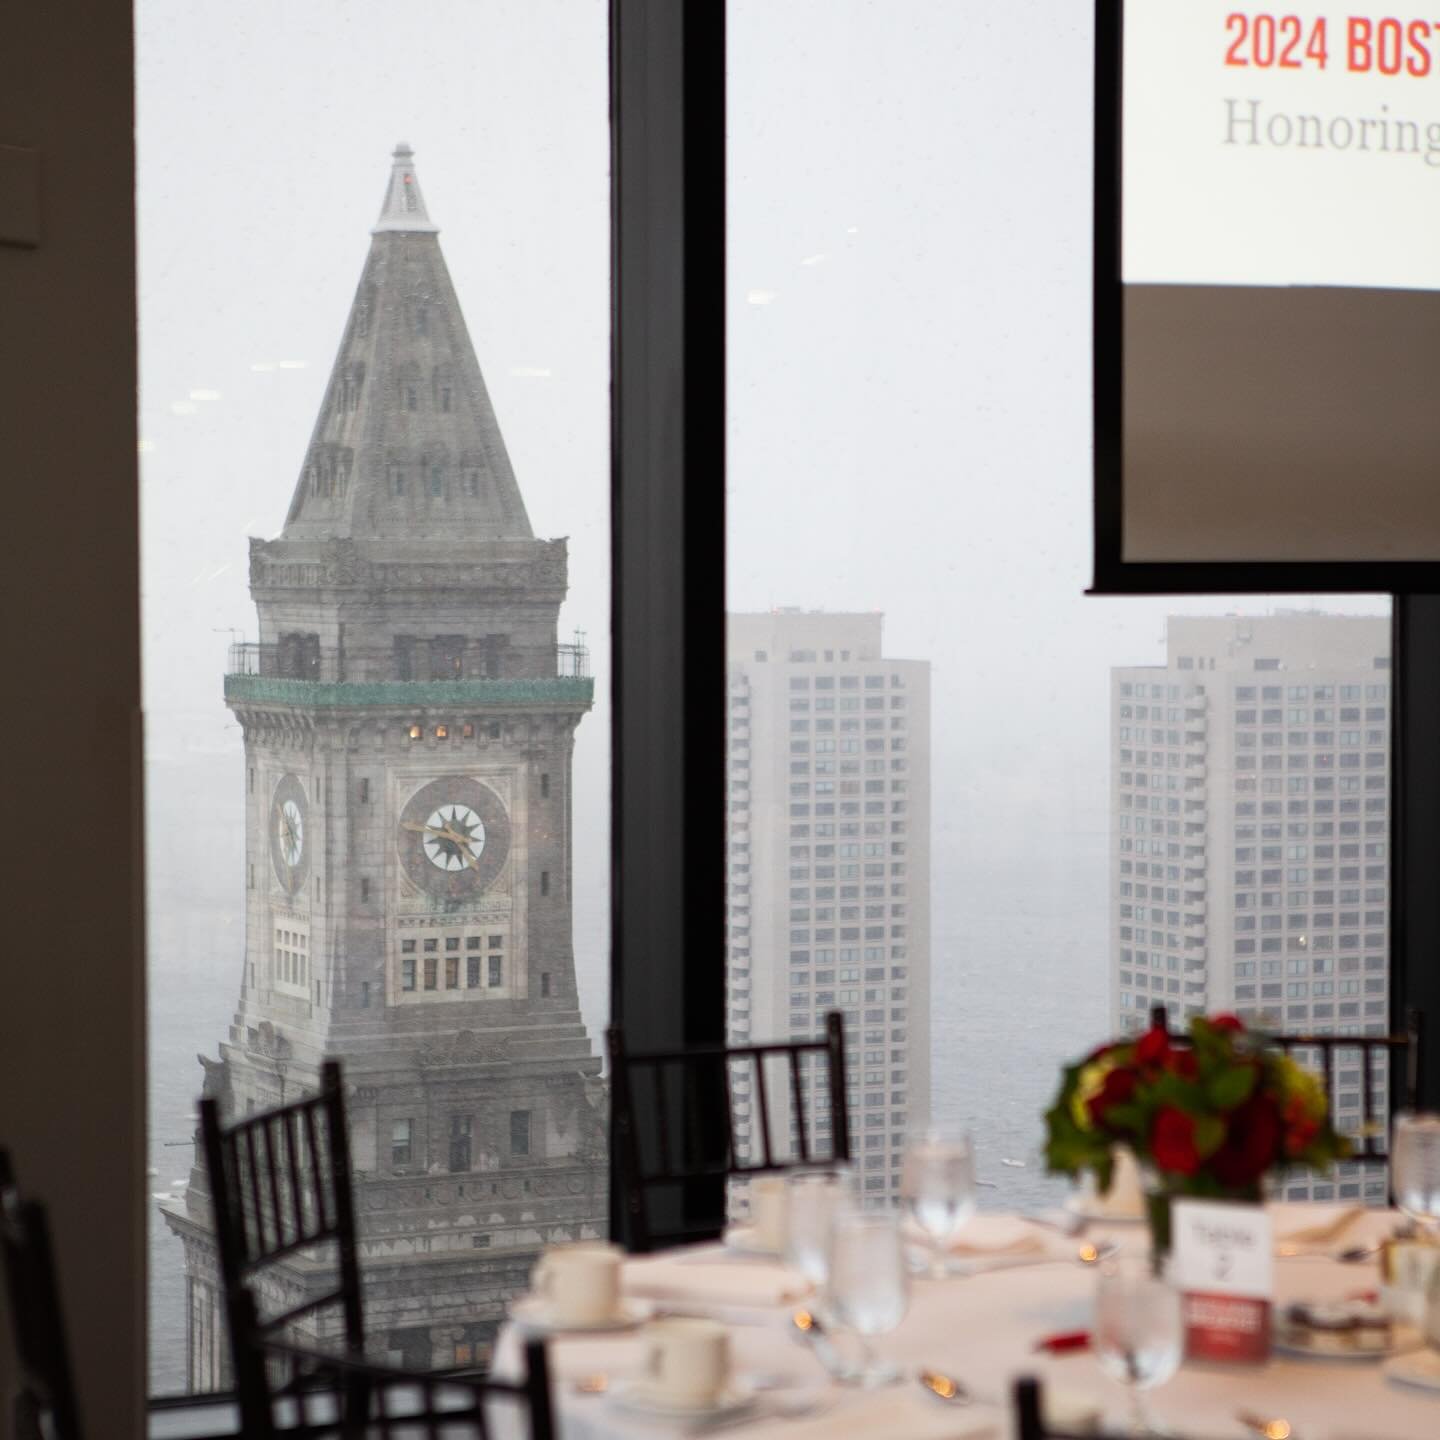 At the 2024 American Red Cross Boston Heroes Breakfast at the State Room, attendees were immersed in a tribute to bravery and community spirit. 

@binitapatelphoto 
@longwoodvenuesanddestinations 
@yaniqueevents 

#community #communityevent #heroes #